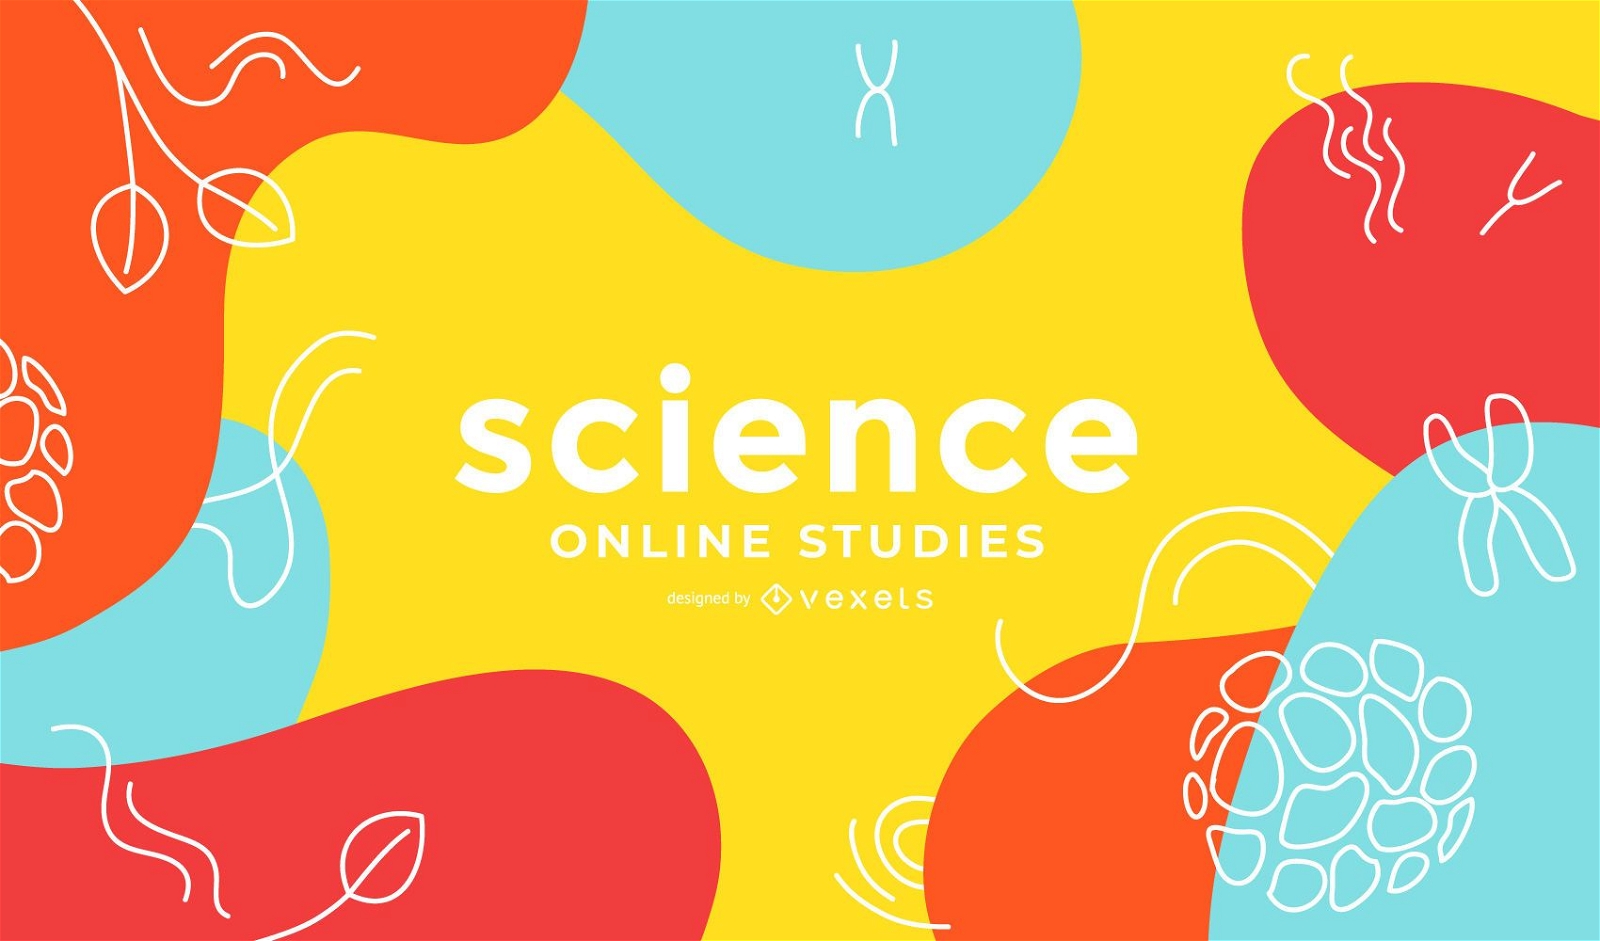 Science online studies abstract cover design